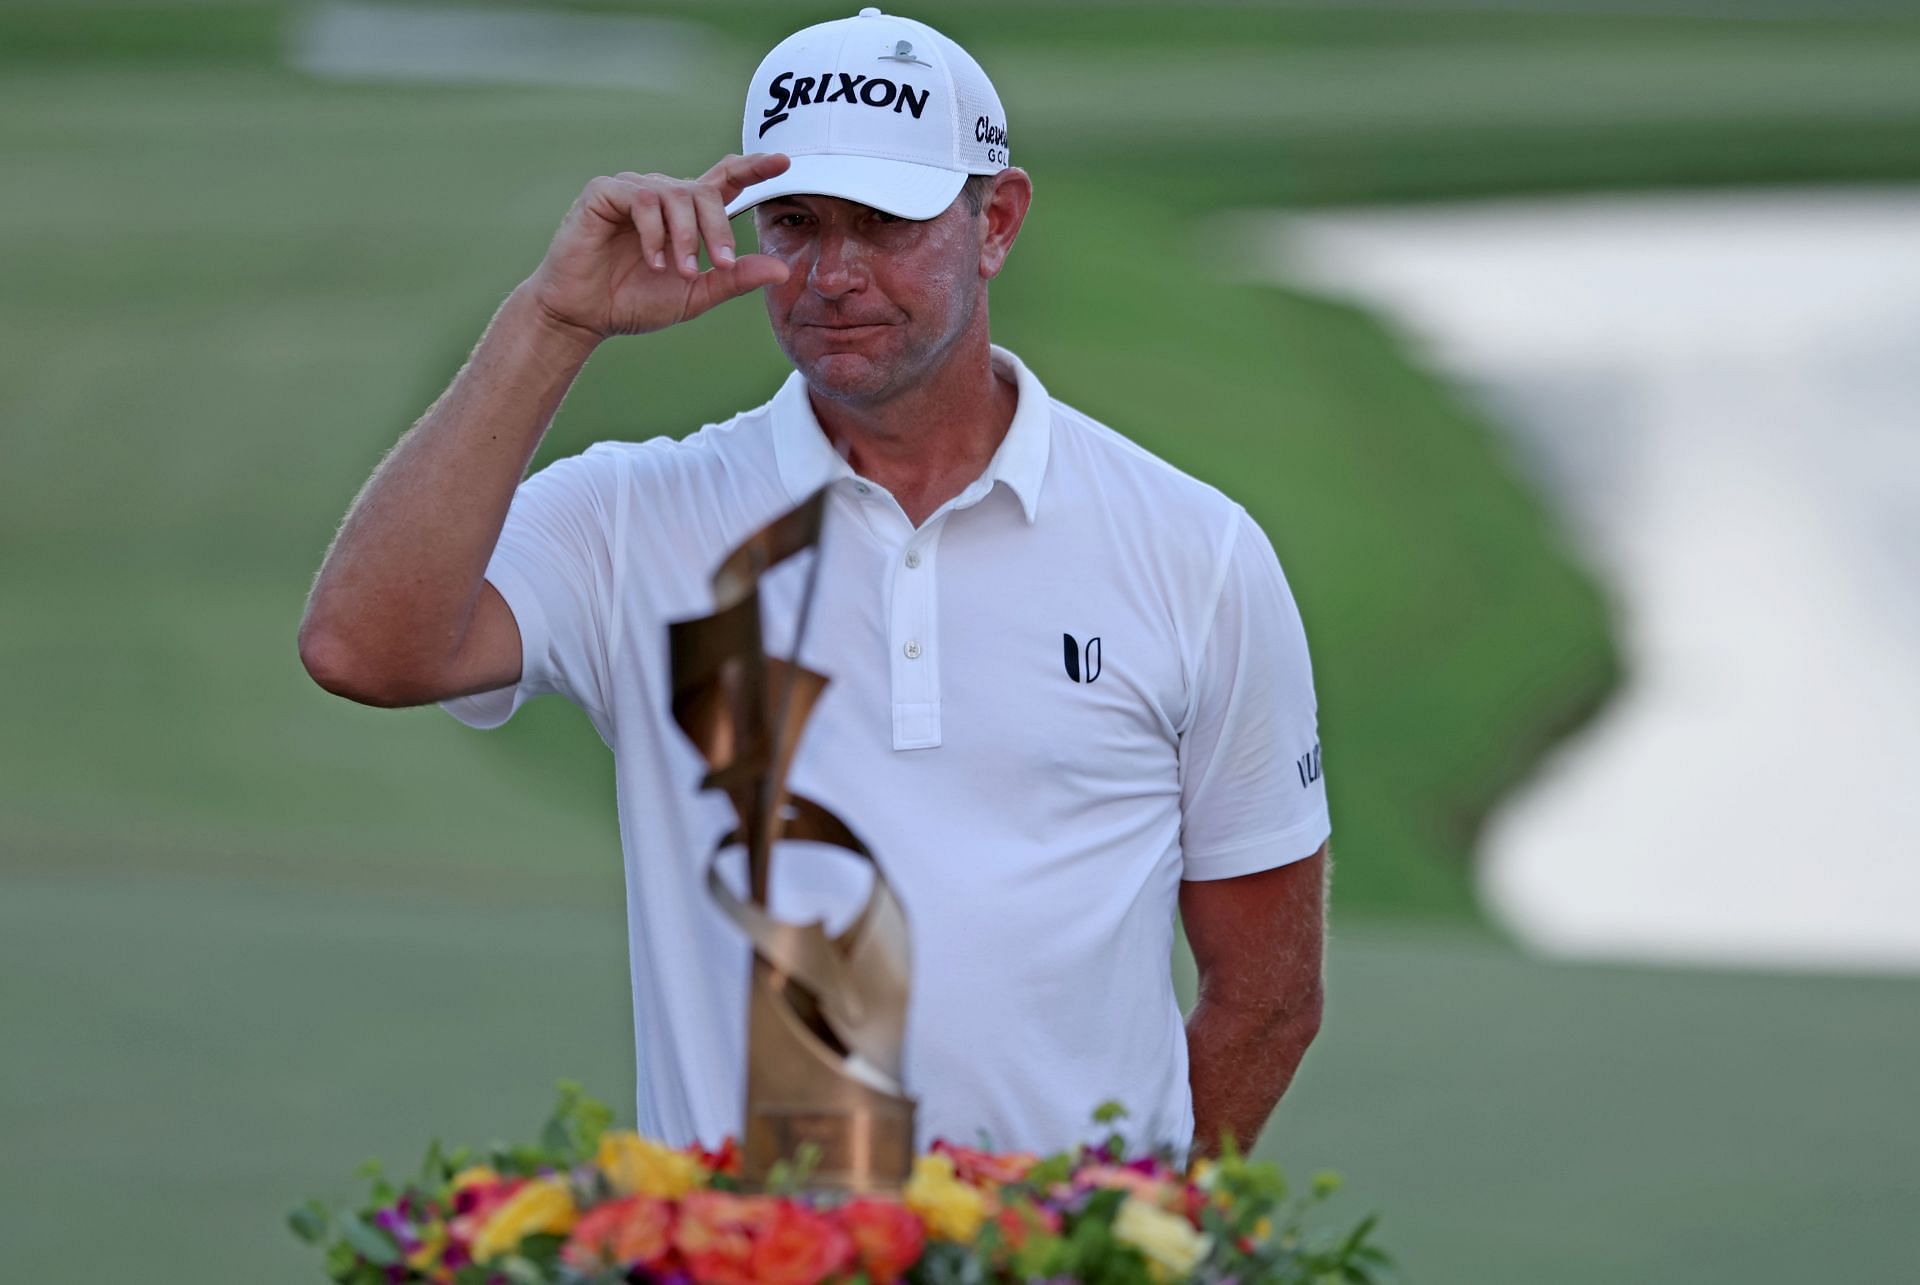 How much did each golfer win at the 20,000,000 FedEx St. Jude